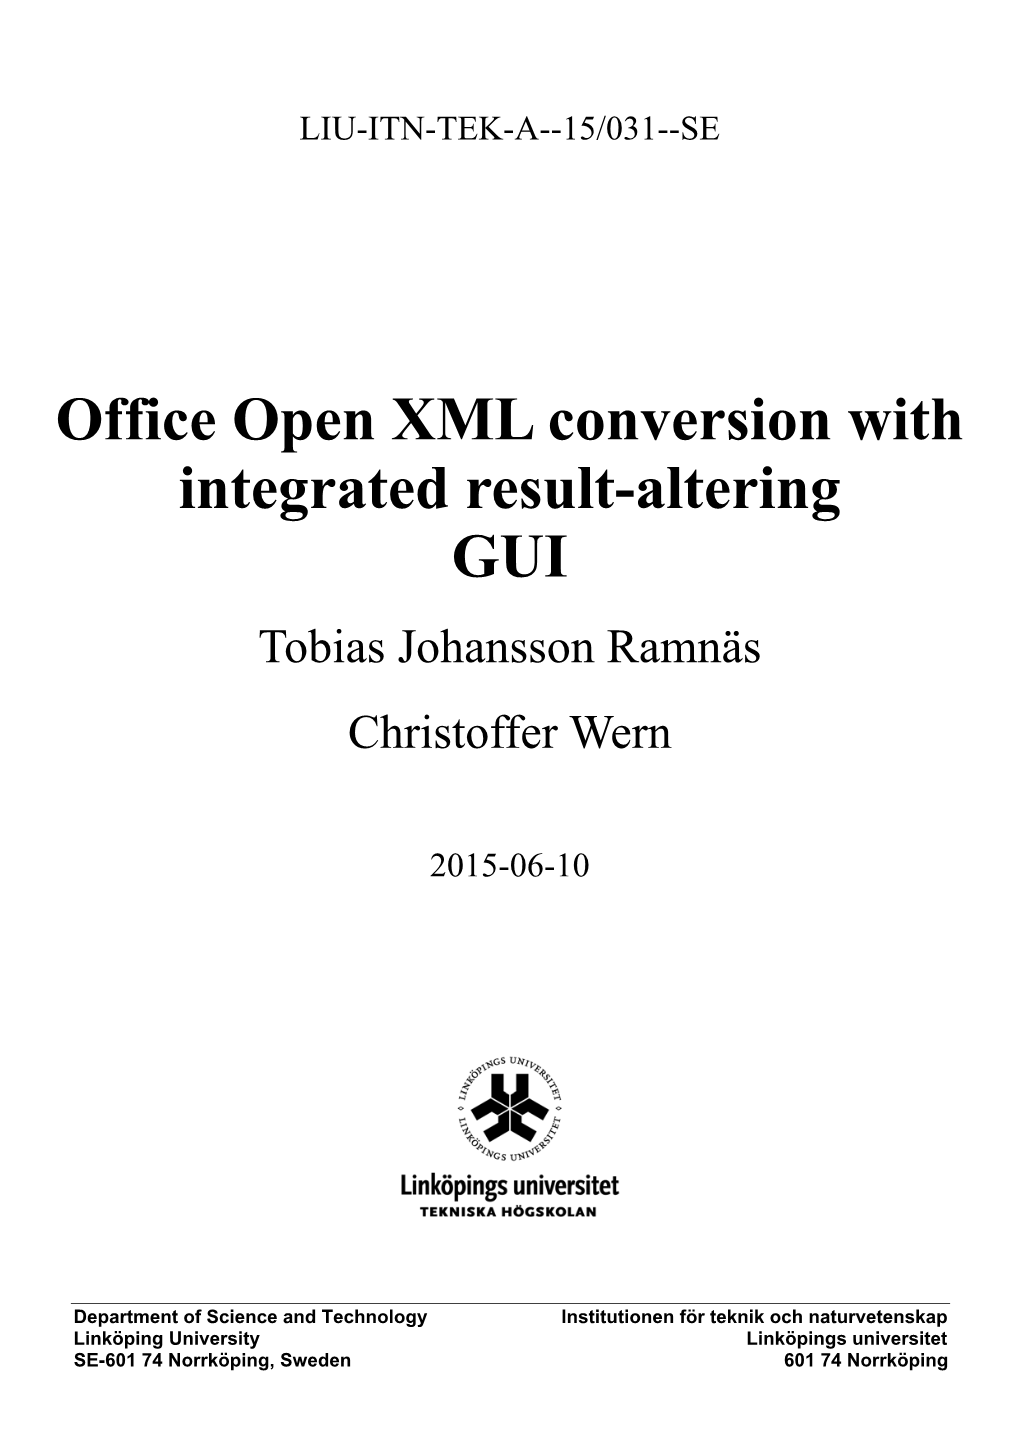 Office Open XML Conversion with Integrated Result-Altering GUI Tobias Johansson Ramnäs Christoffer Wern